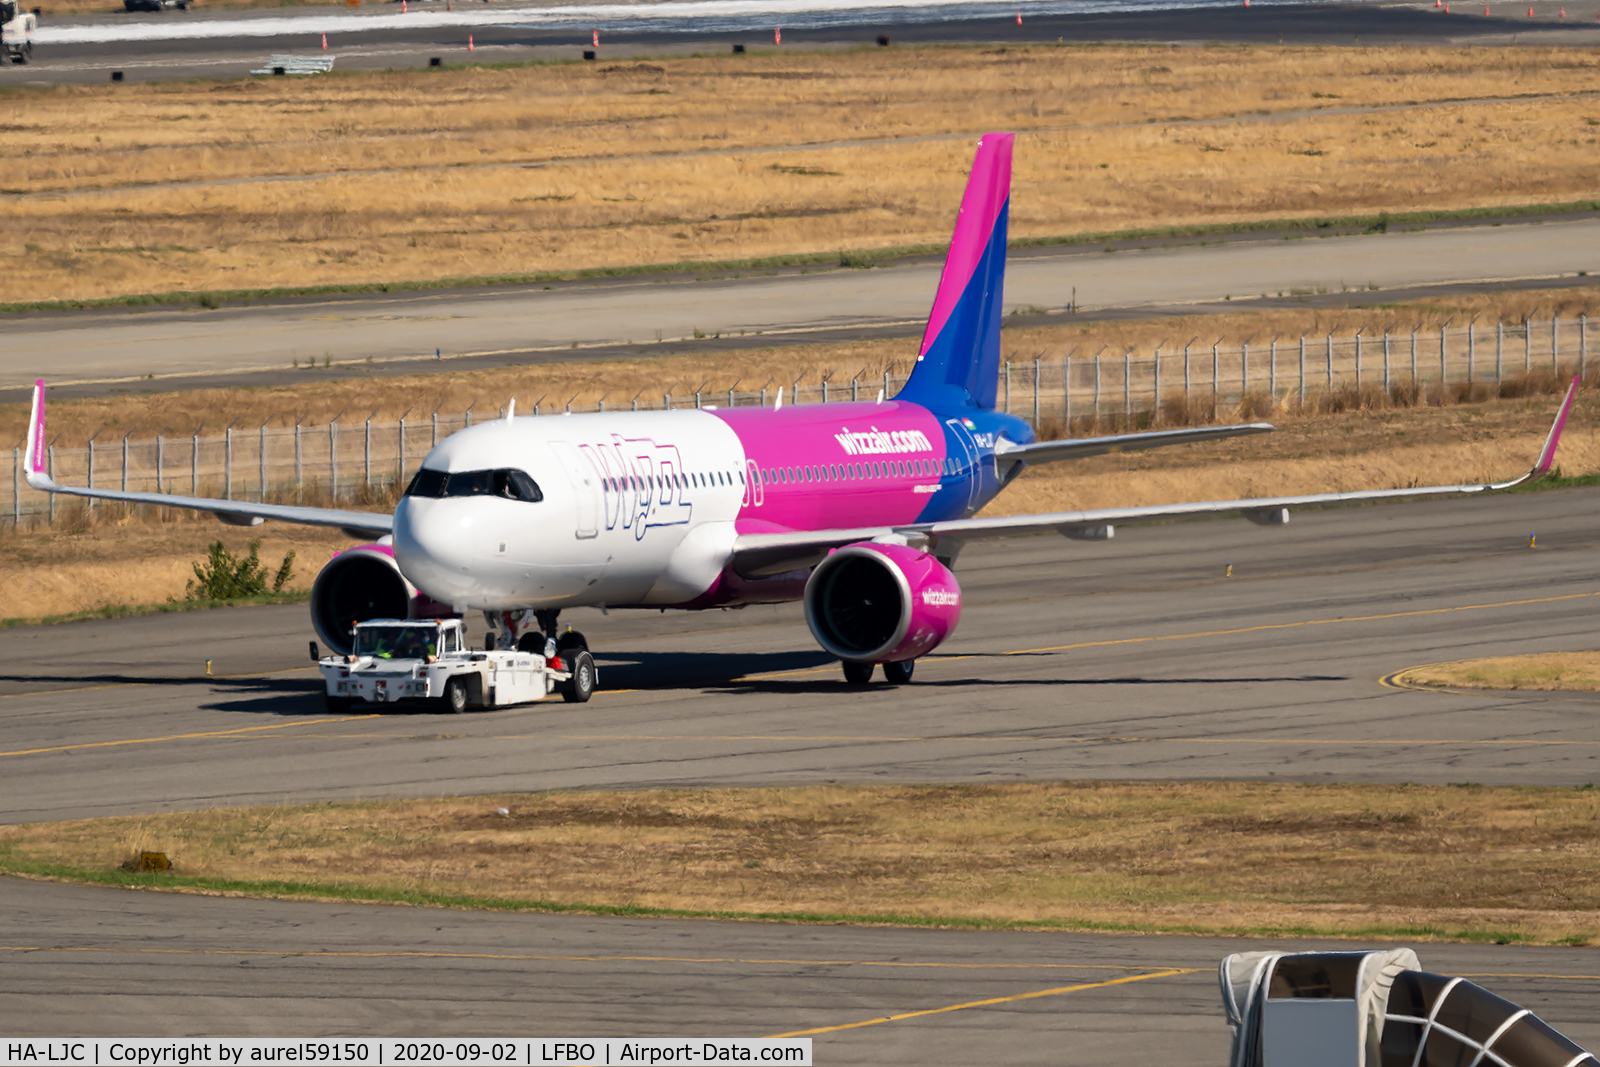 HA-LJC, 2020 Airbus A320-271N C/N 10112, Ready for his delivery flight (2 days before)